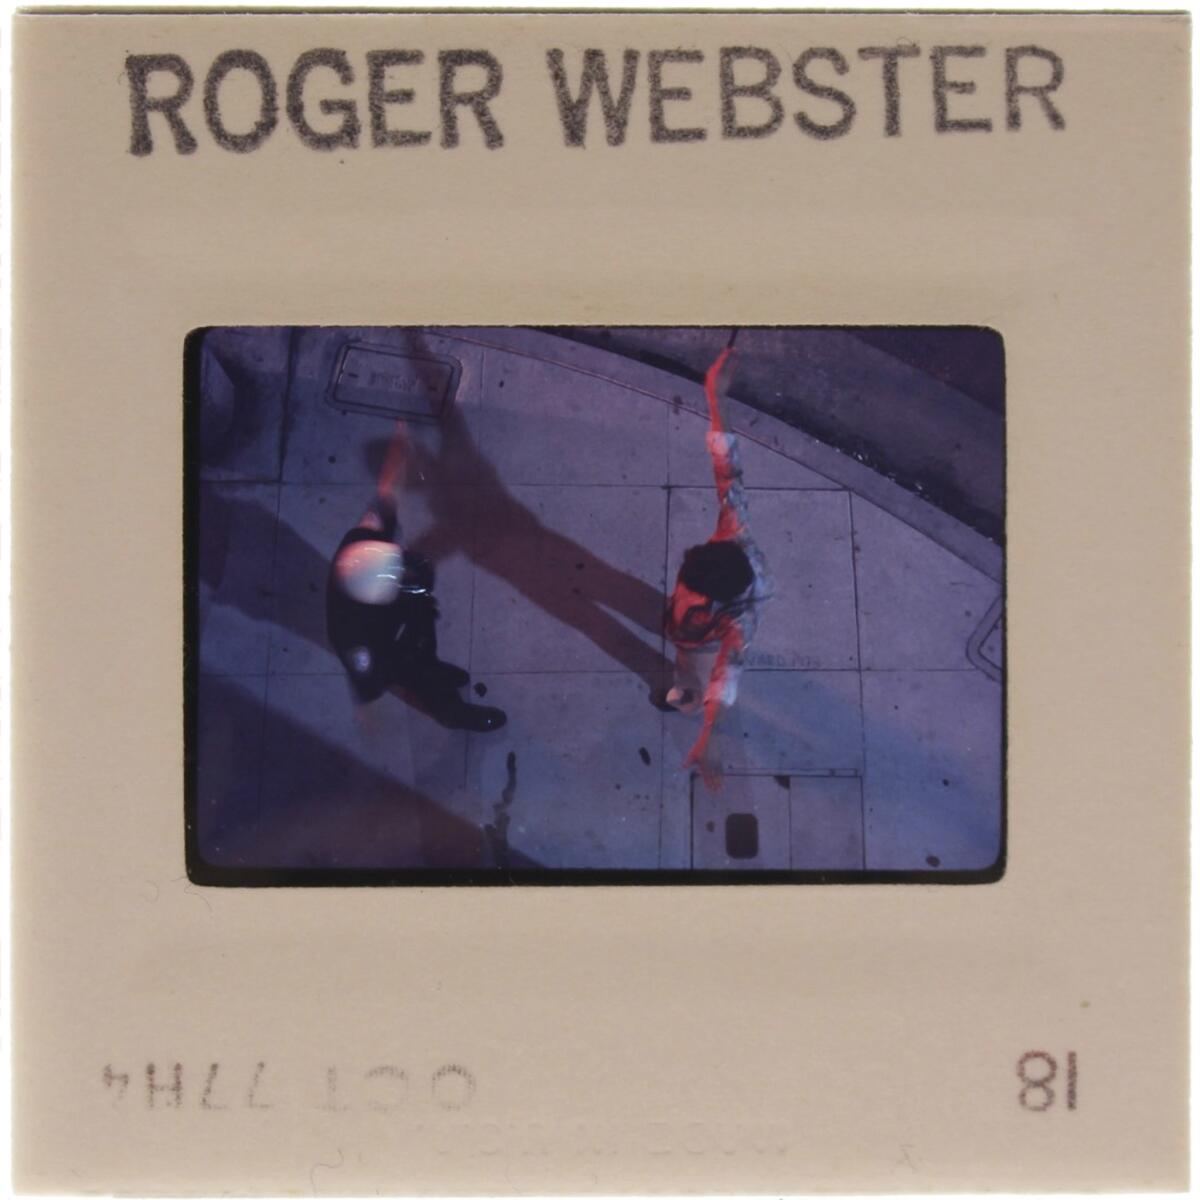 A photograph by Roger Webster of a sidewalk encounter with the Los Angeles police. (Environmental Communications and LAXART)